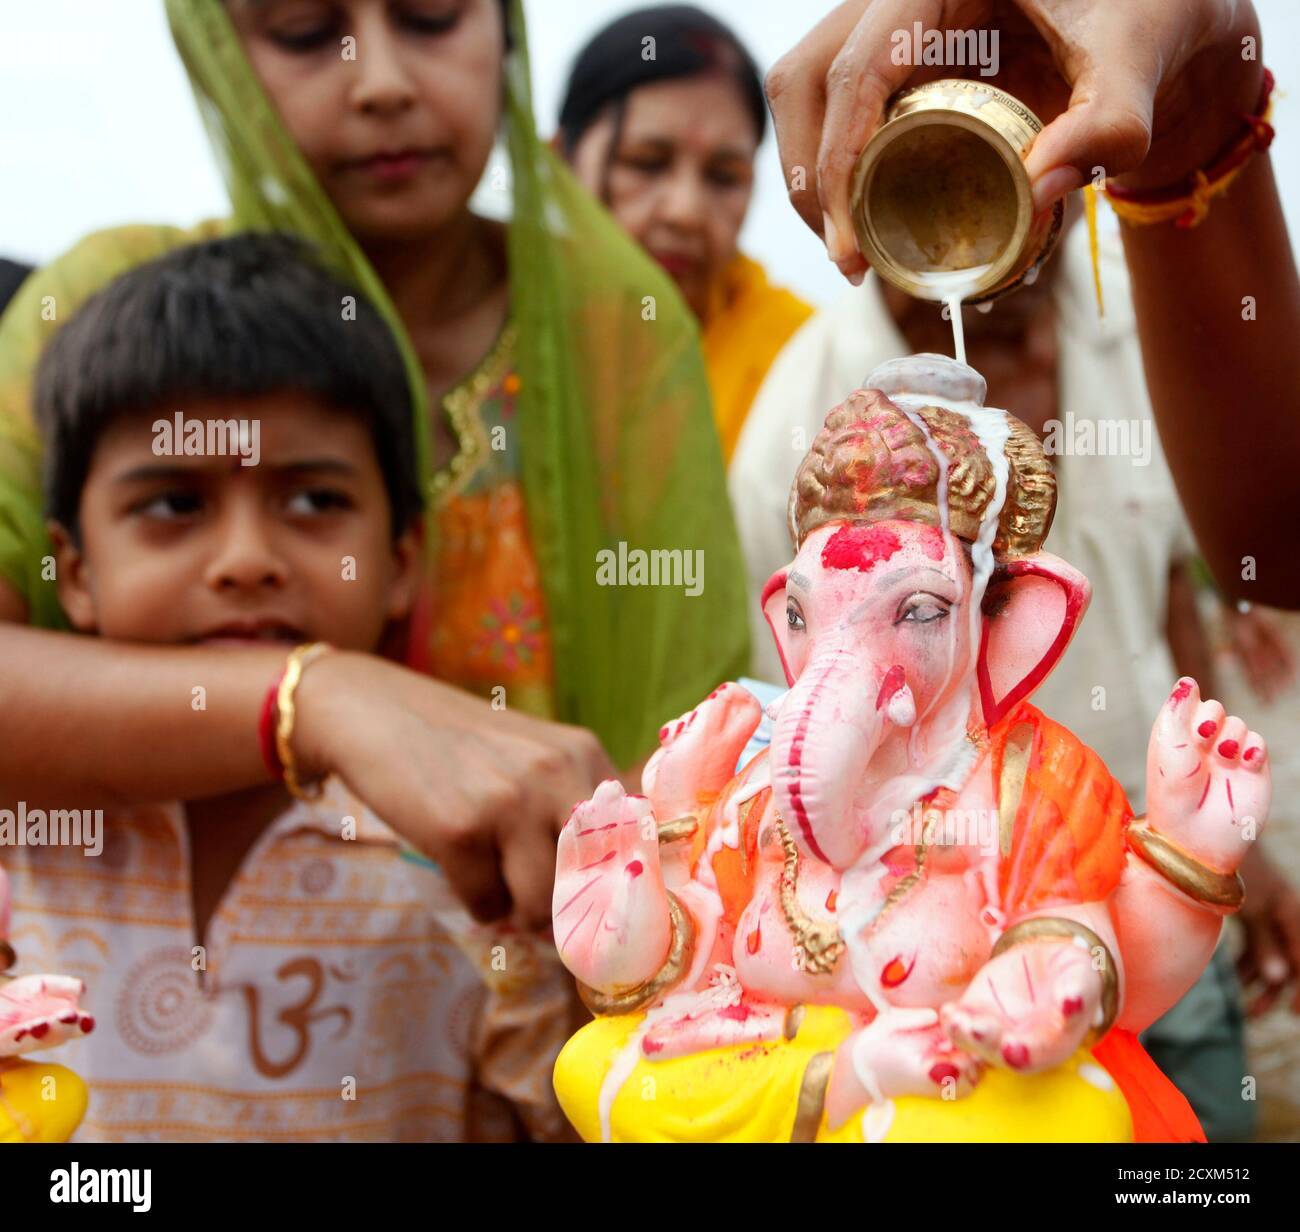 A Hindu devotee pours milk on a murti of Lord Ganesha during the Ganesh Utsav festival at Chagville beach in Chaguaramas September 15, 2013. REUTERS/Andrea De Silva (TRINIDAD AND TOBAGO - Tags: RELIGION SOCIETY) Stock Photo